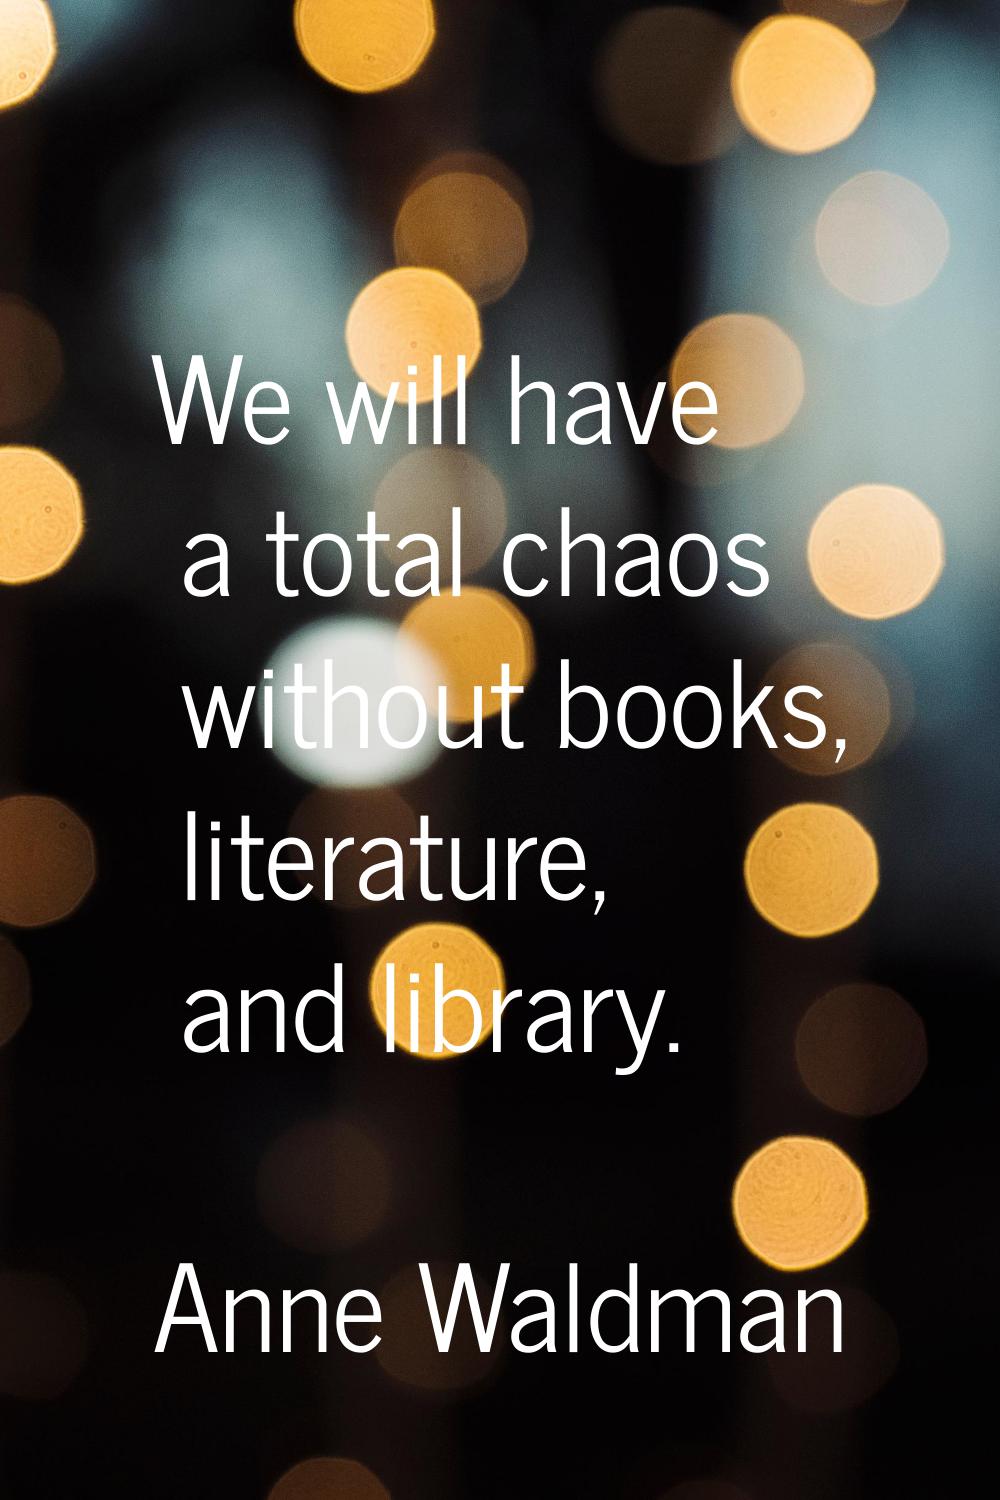 We will have a total chaos without books, literature, and library.